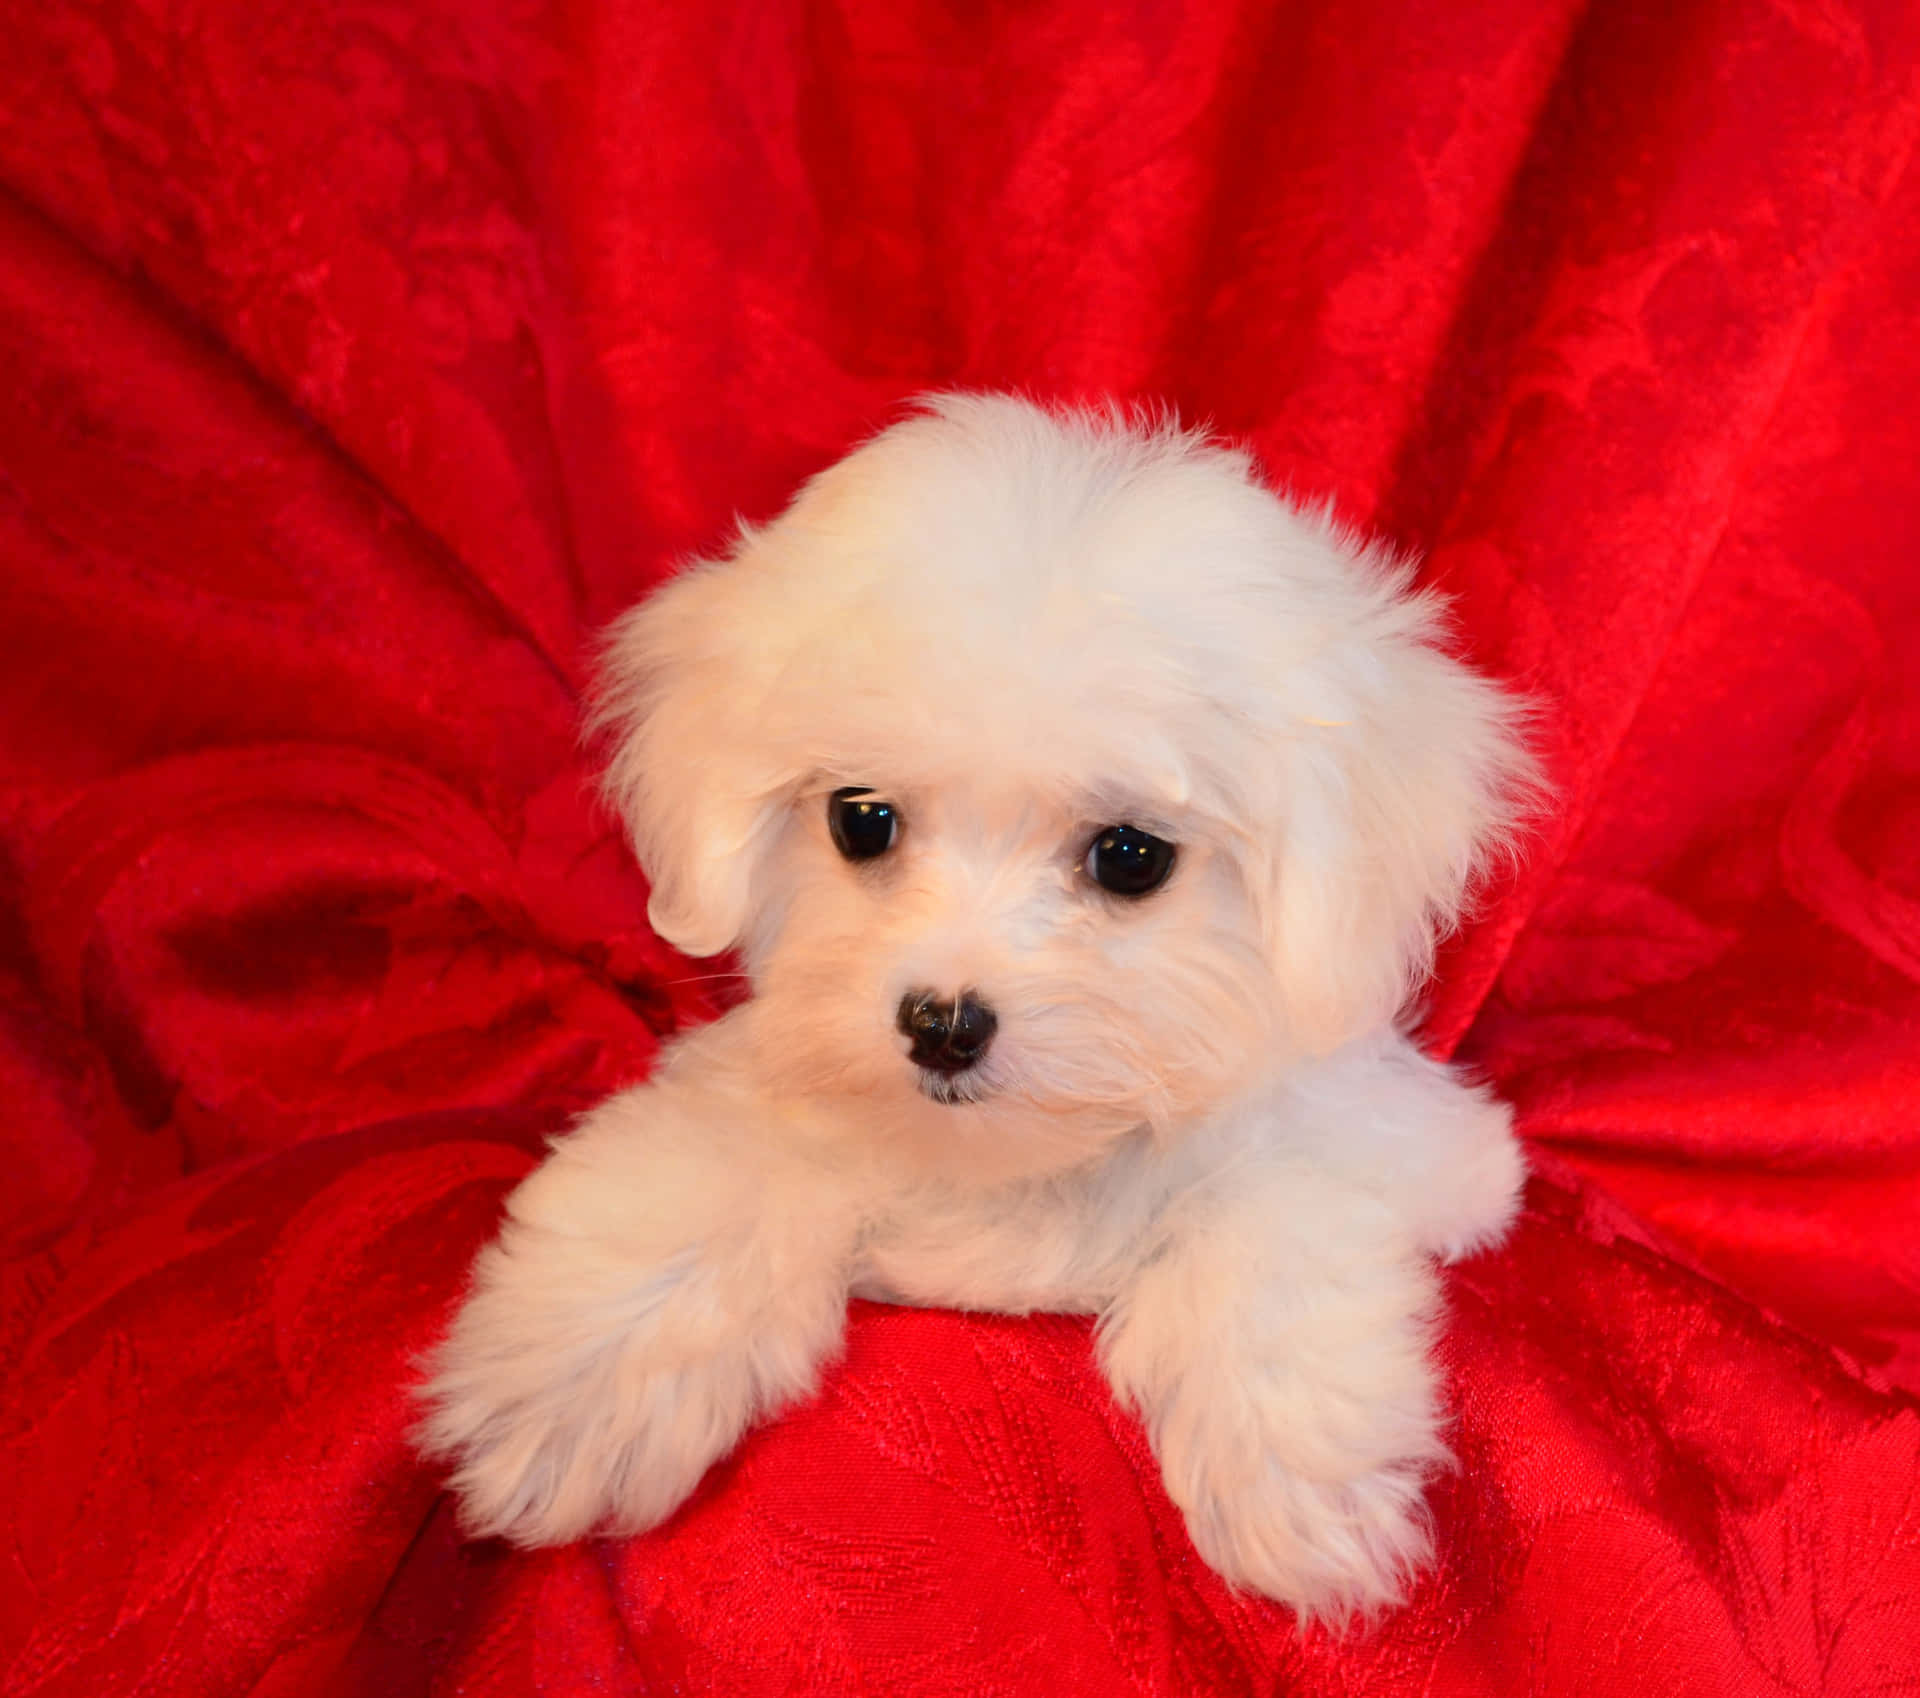 A White Puppy On A Red Cloth